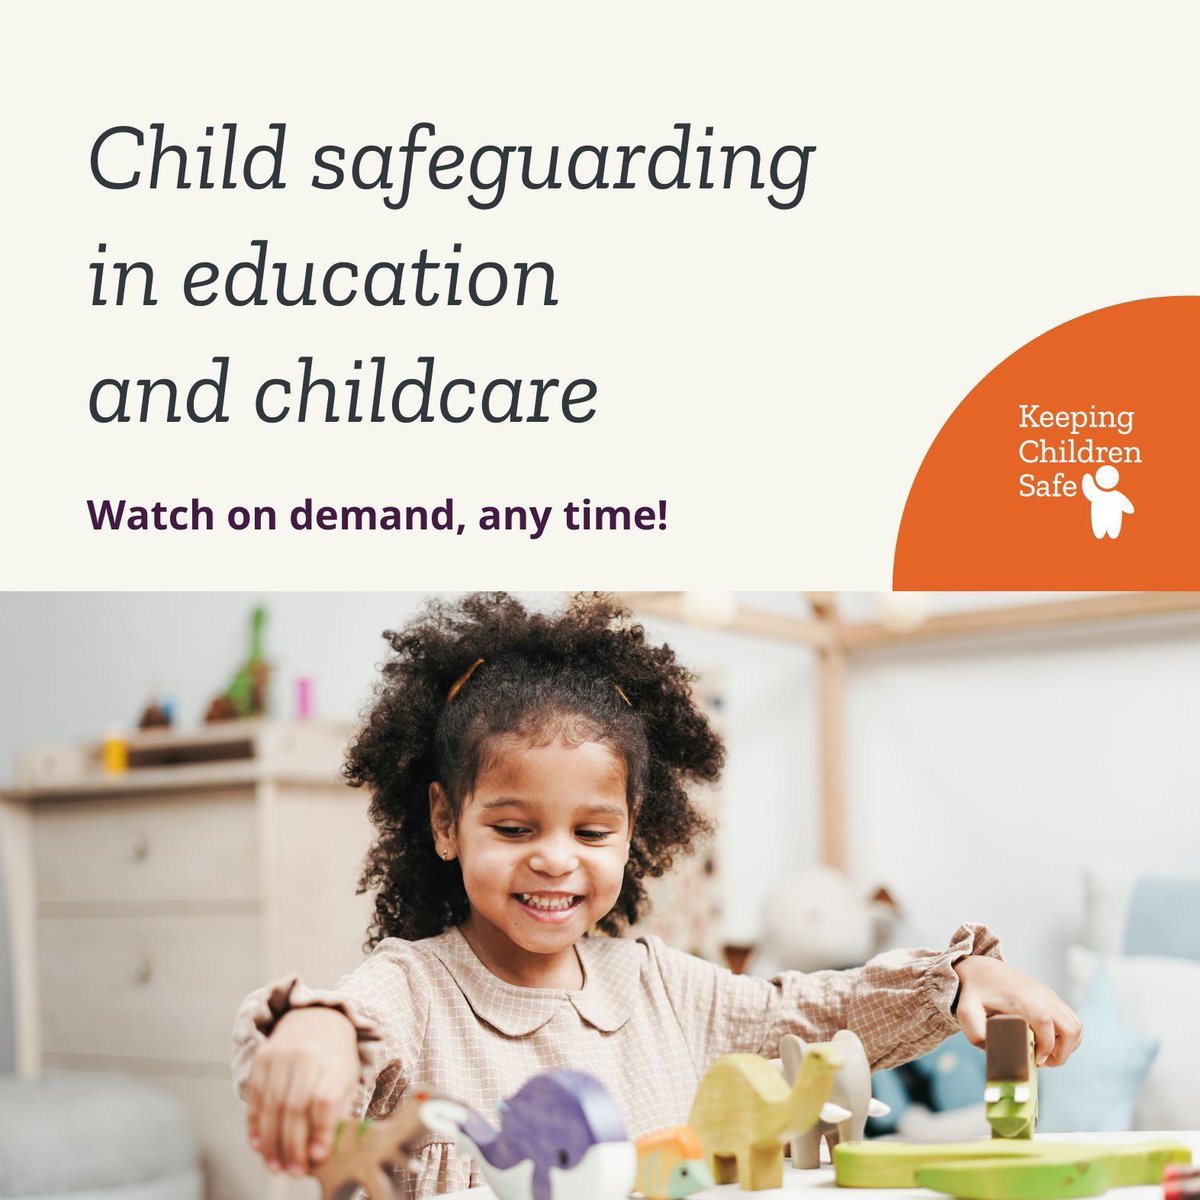 🌍 Missed our Child Safeguarding in Education and Childcare Global Summit? Don't worry! You can watch all the talks on-demand for free by registering at: buff.ly/47IY8m4 #SafeAtSchool2023